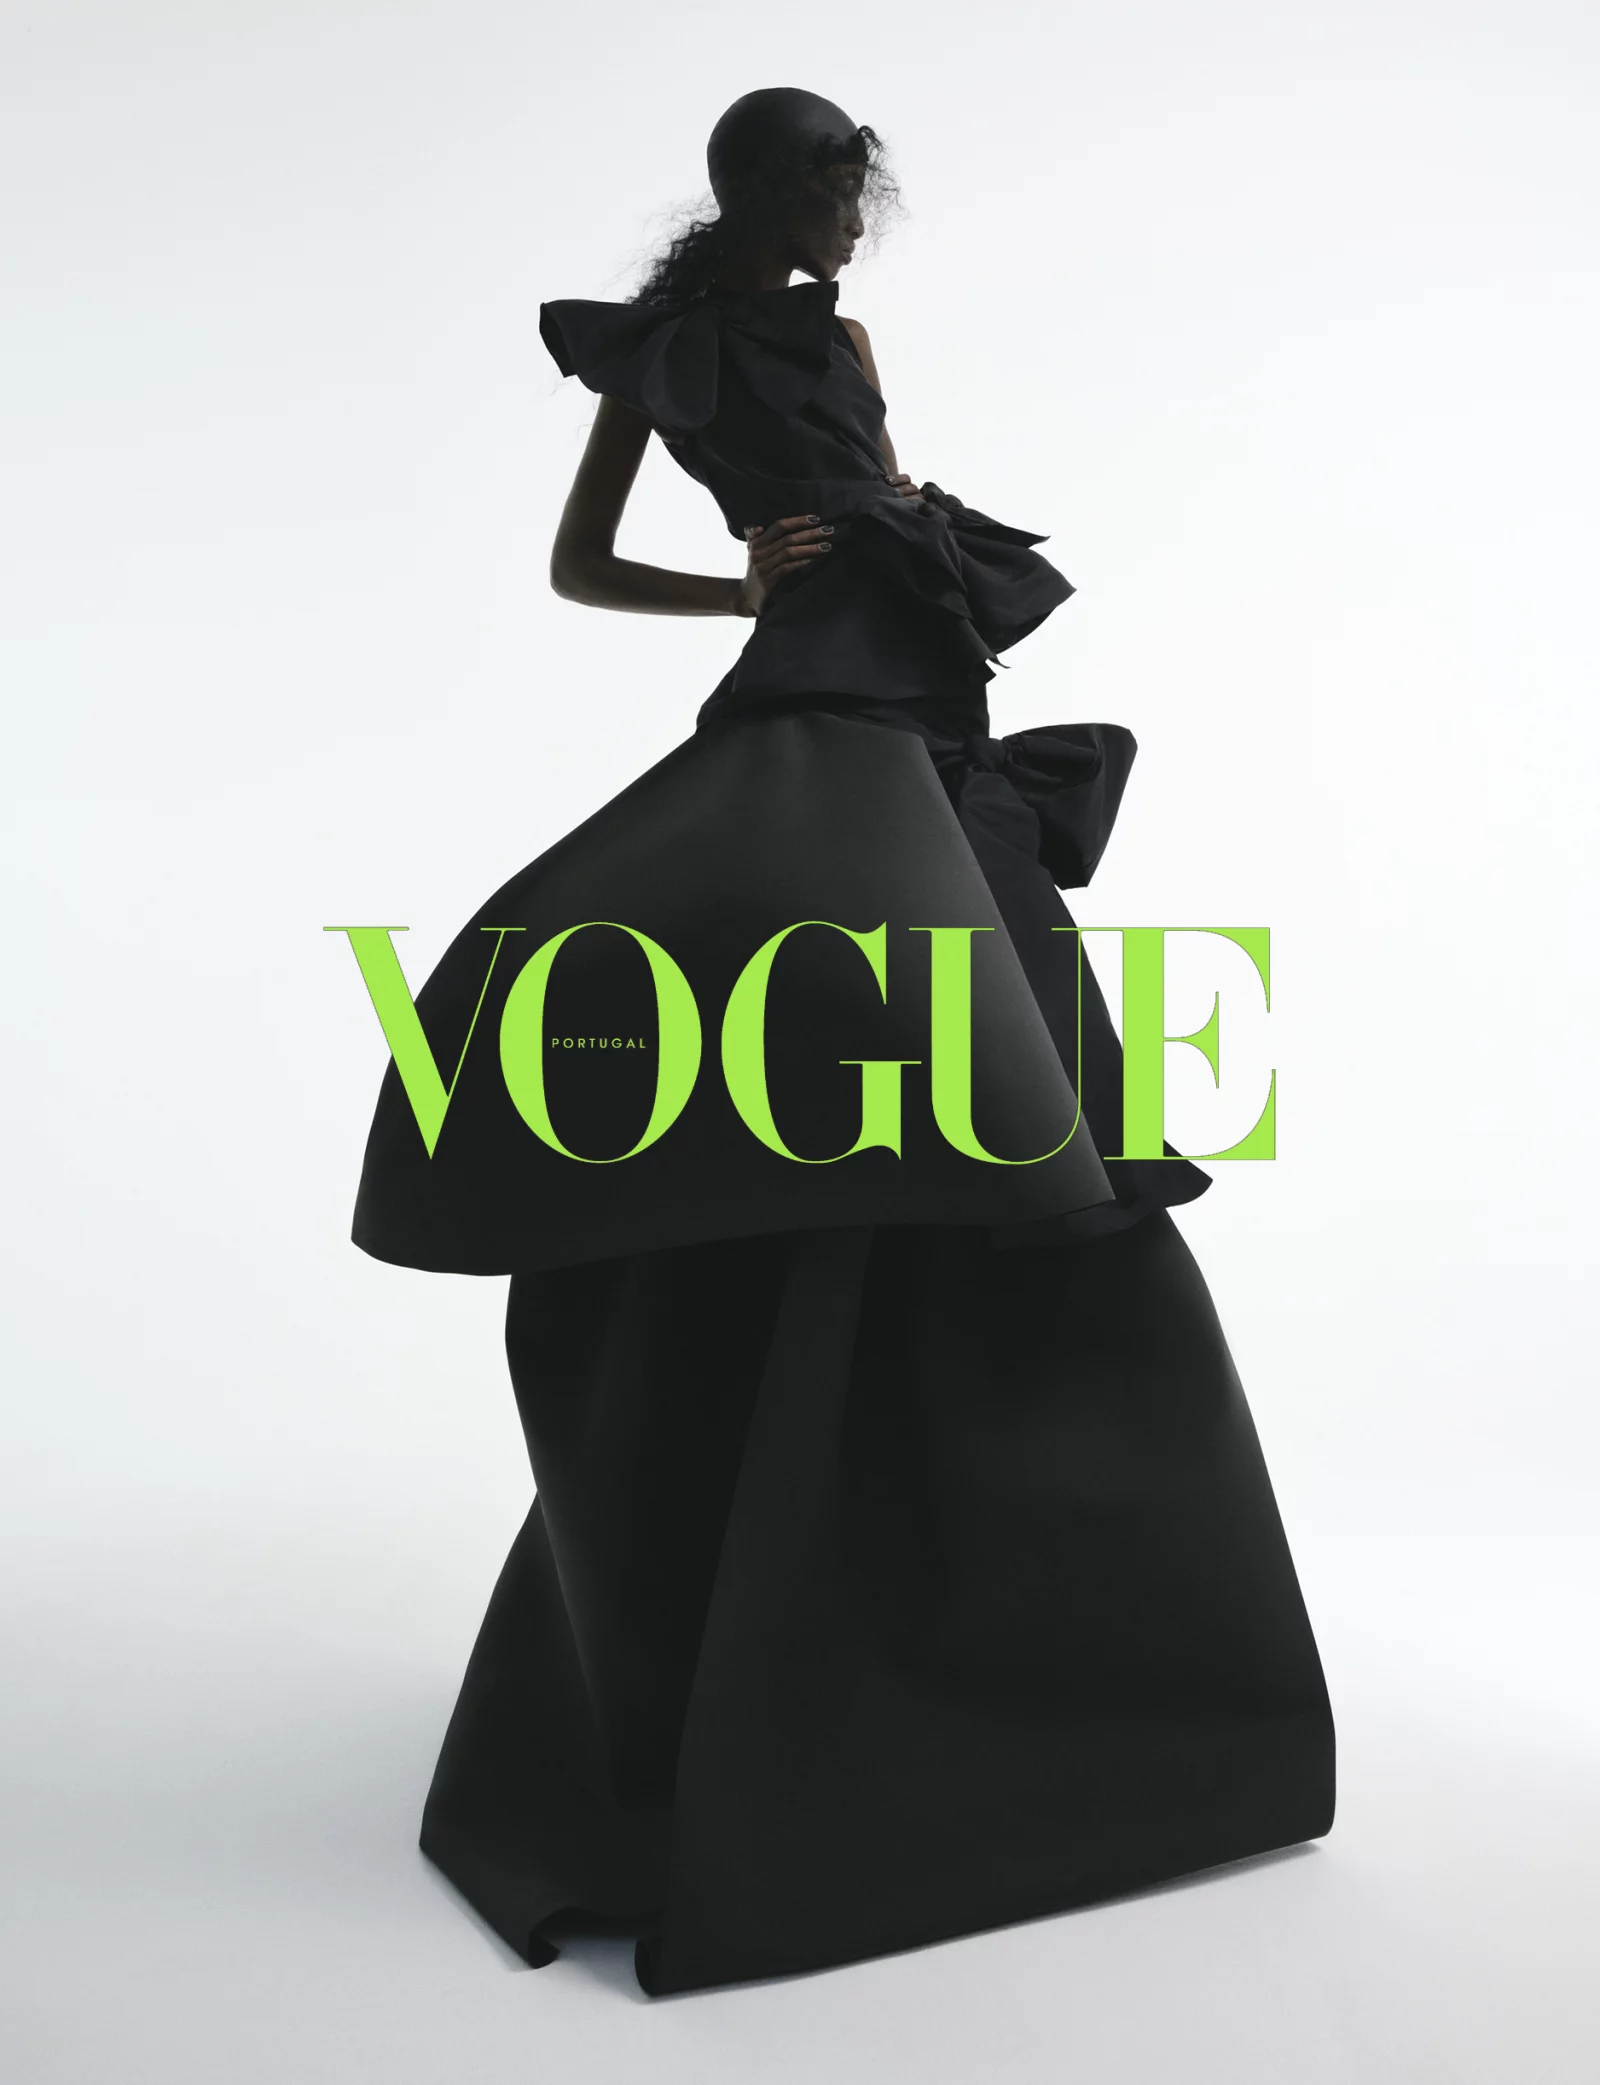 VOGUE Portugal 1 by Andreas ORTNER